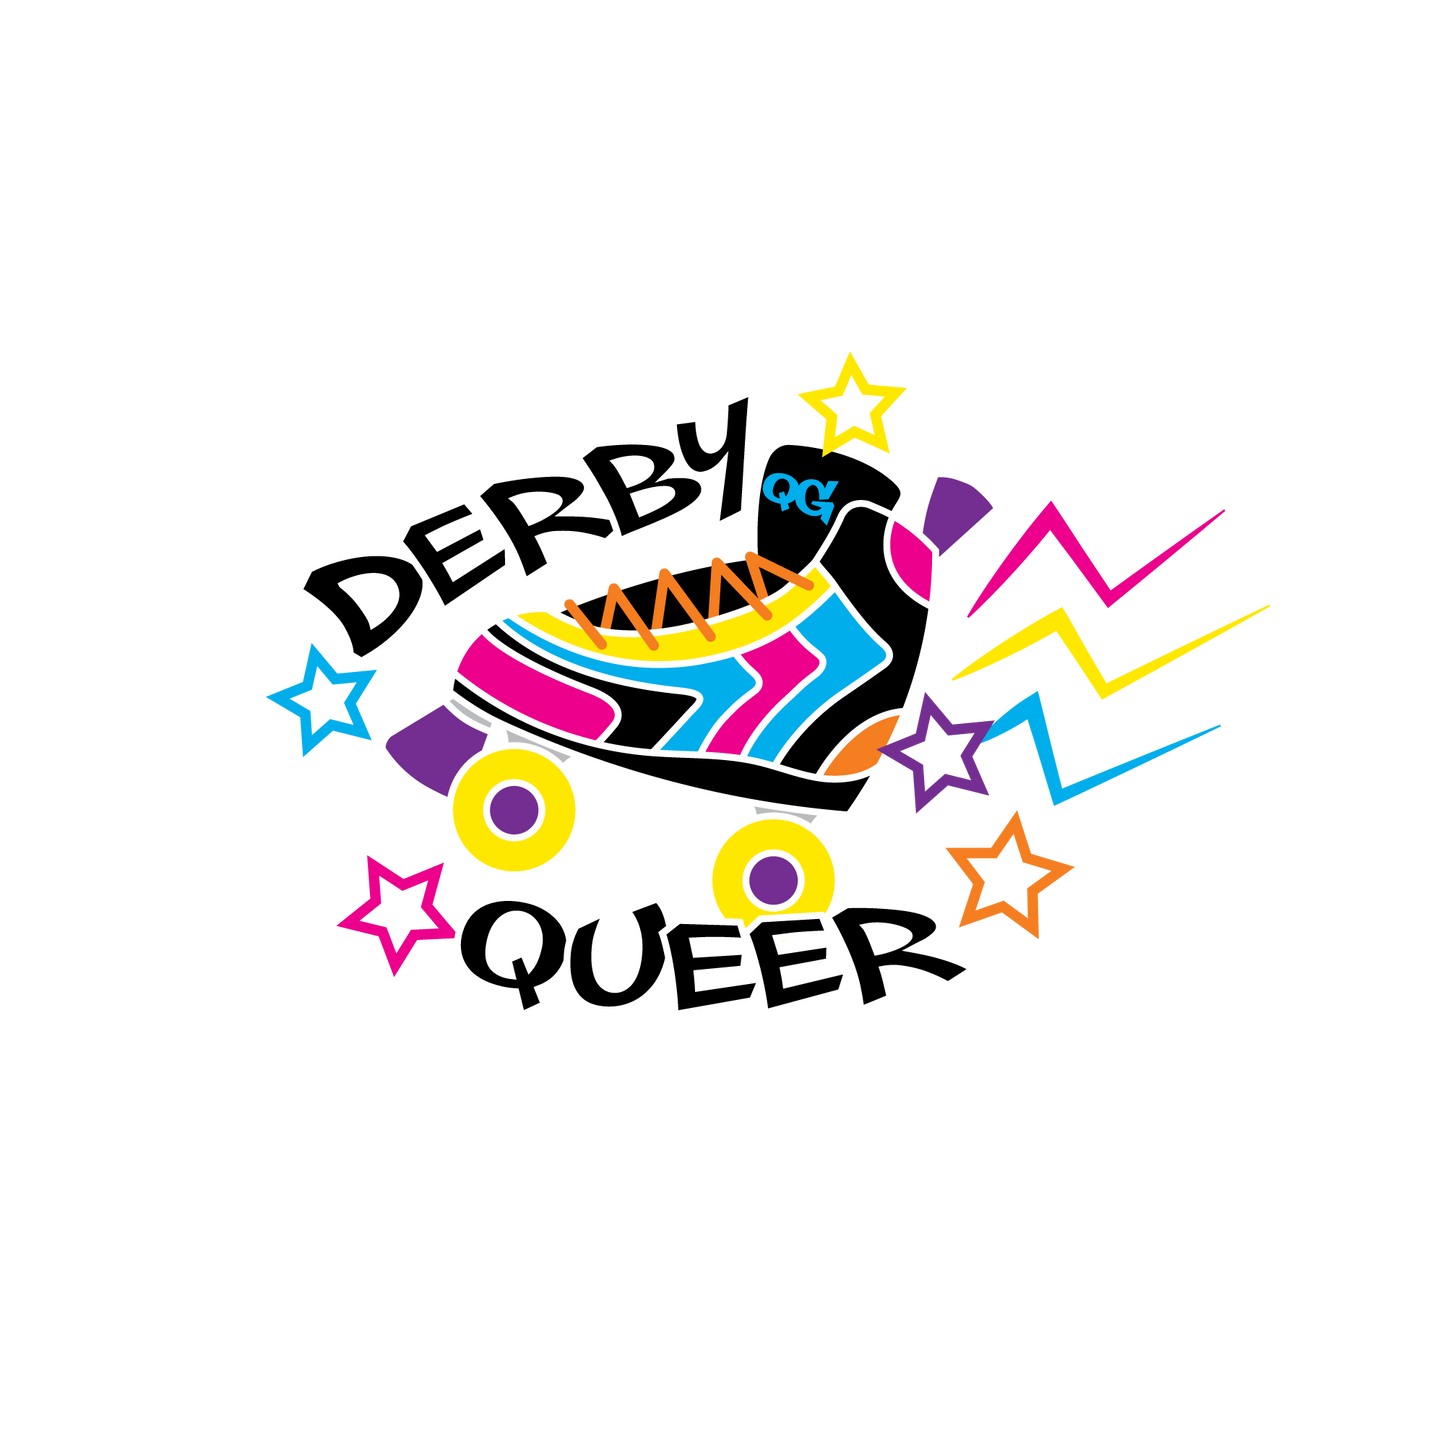 Derby Queer T-Shirt